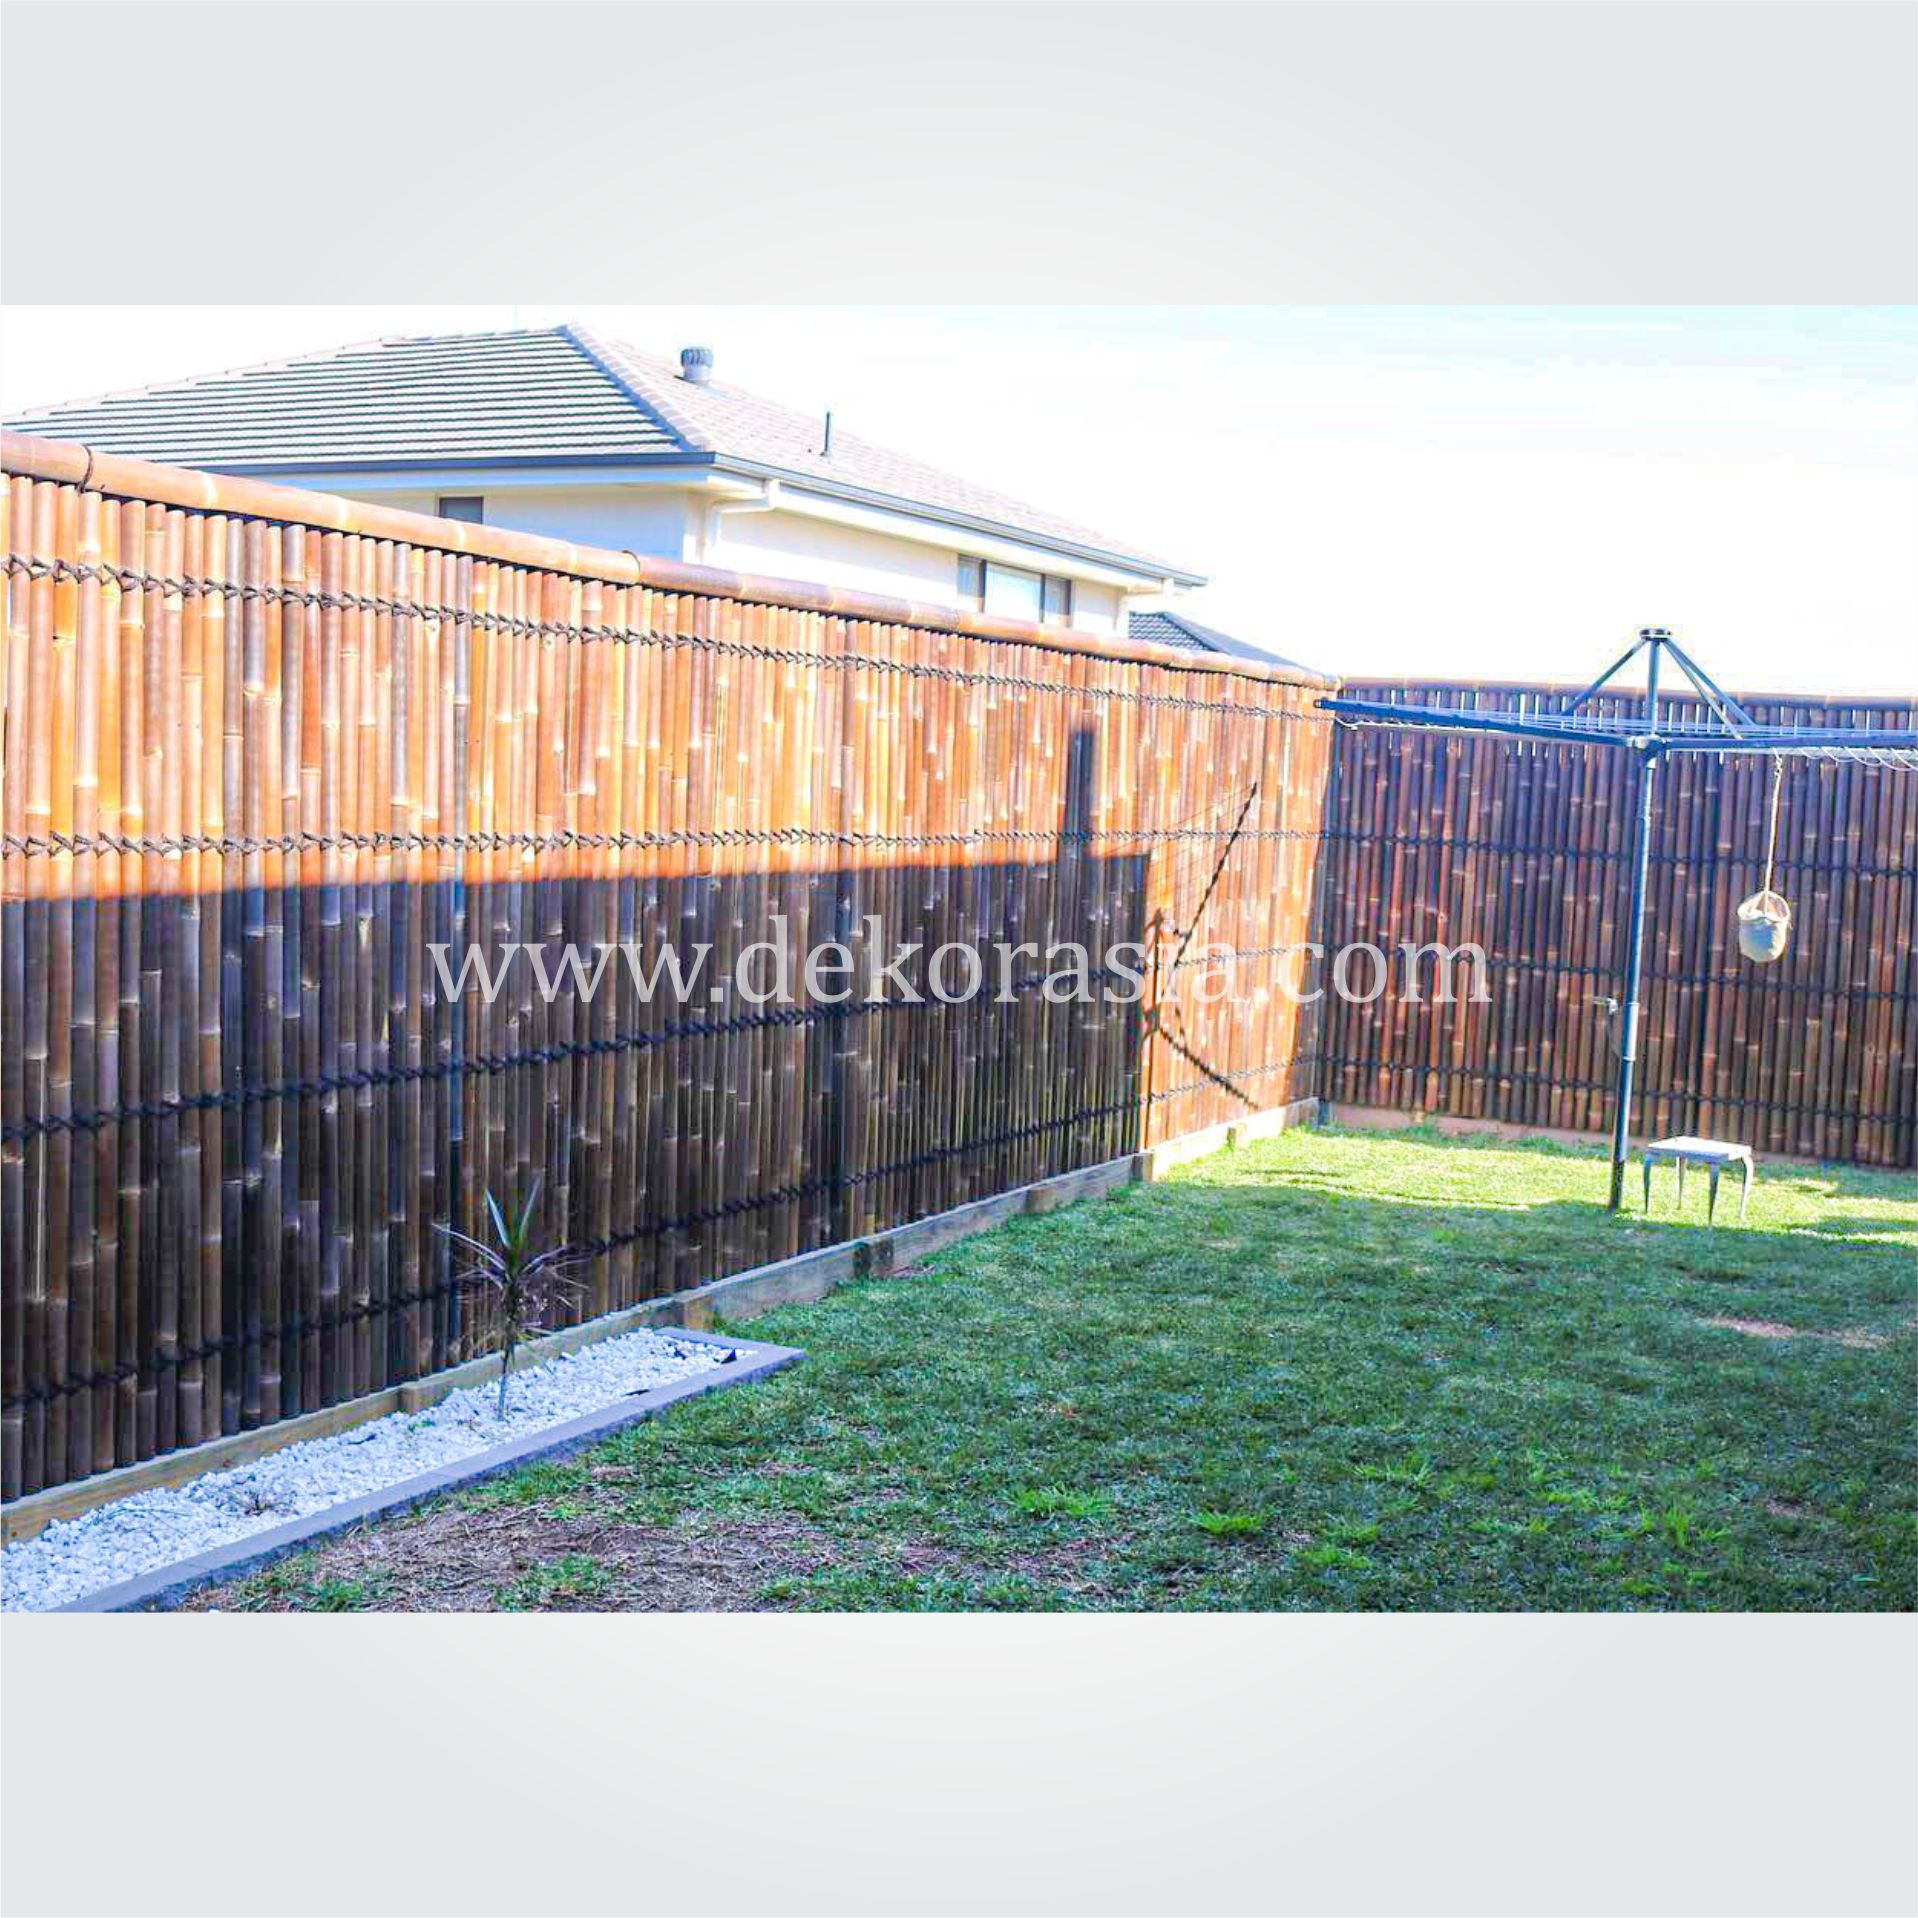 Bamboo Fencing, Bamboo Panels, and Bamboo Screen Fence Natural for Home Garden